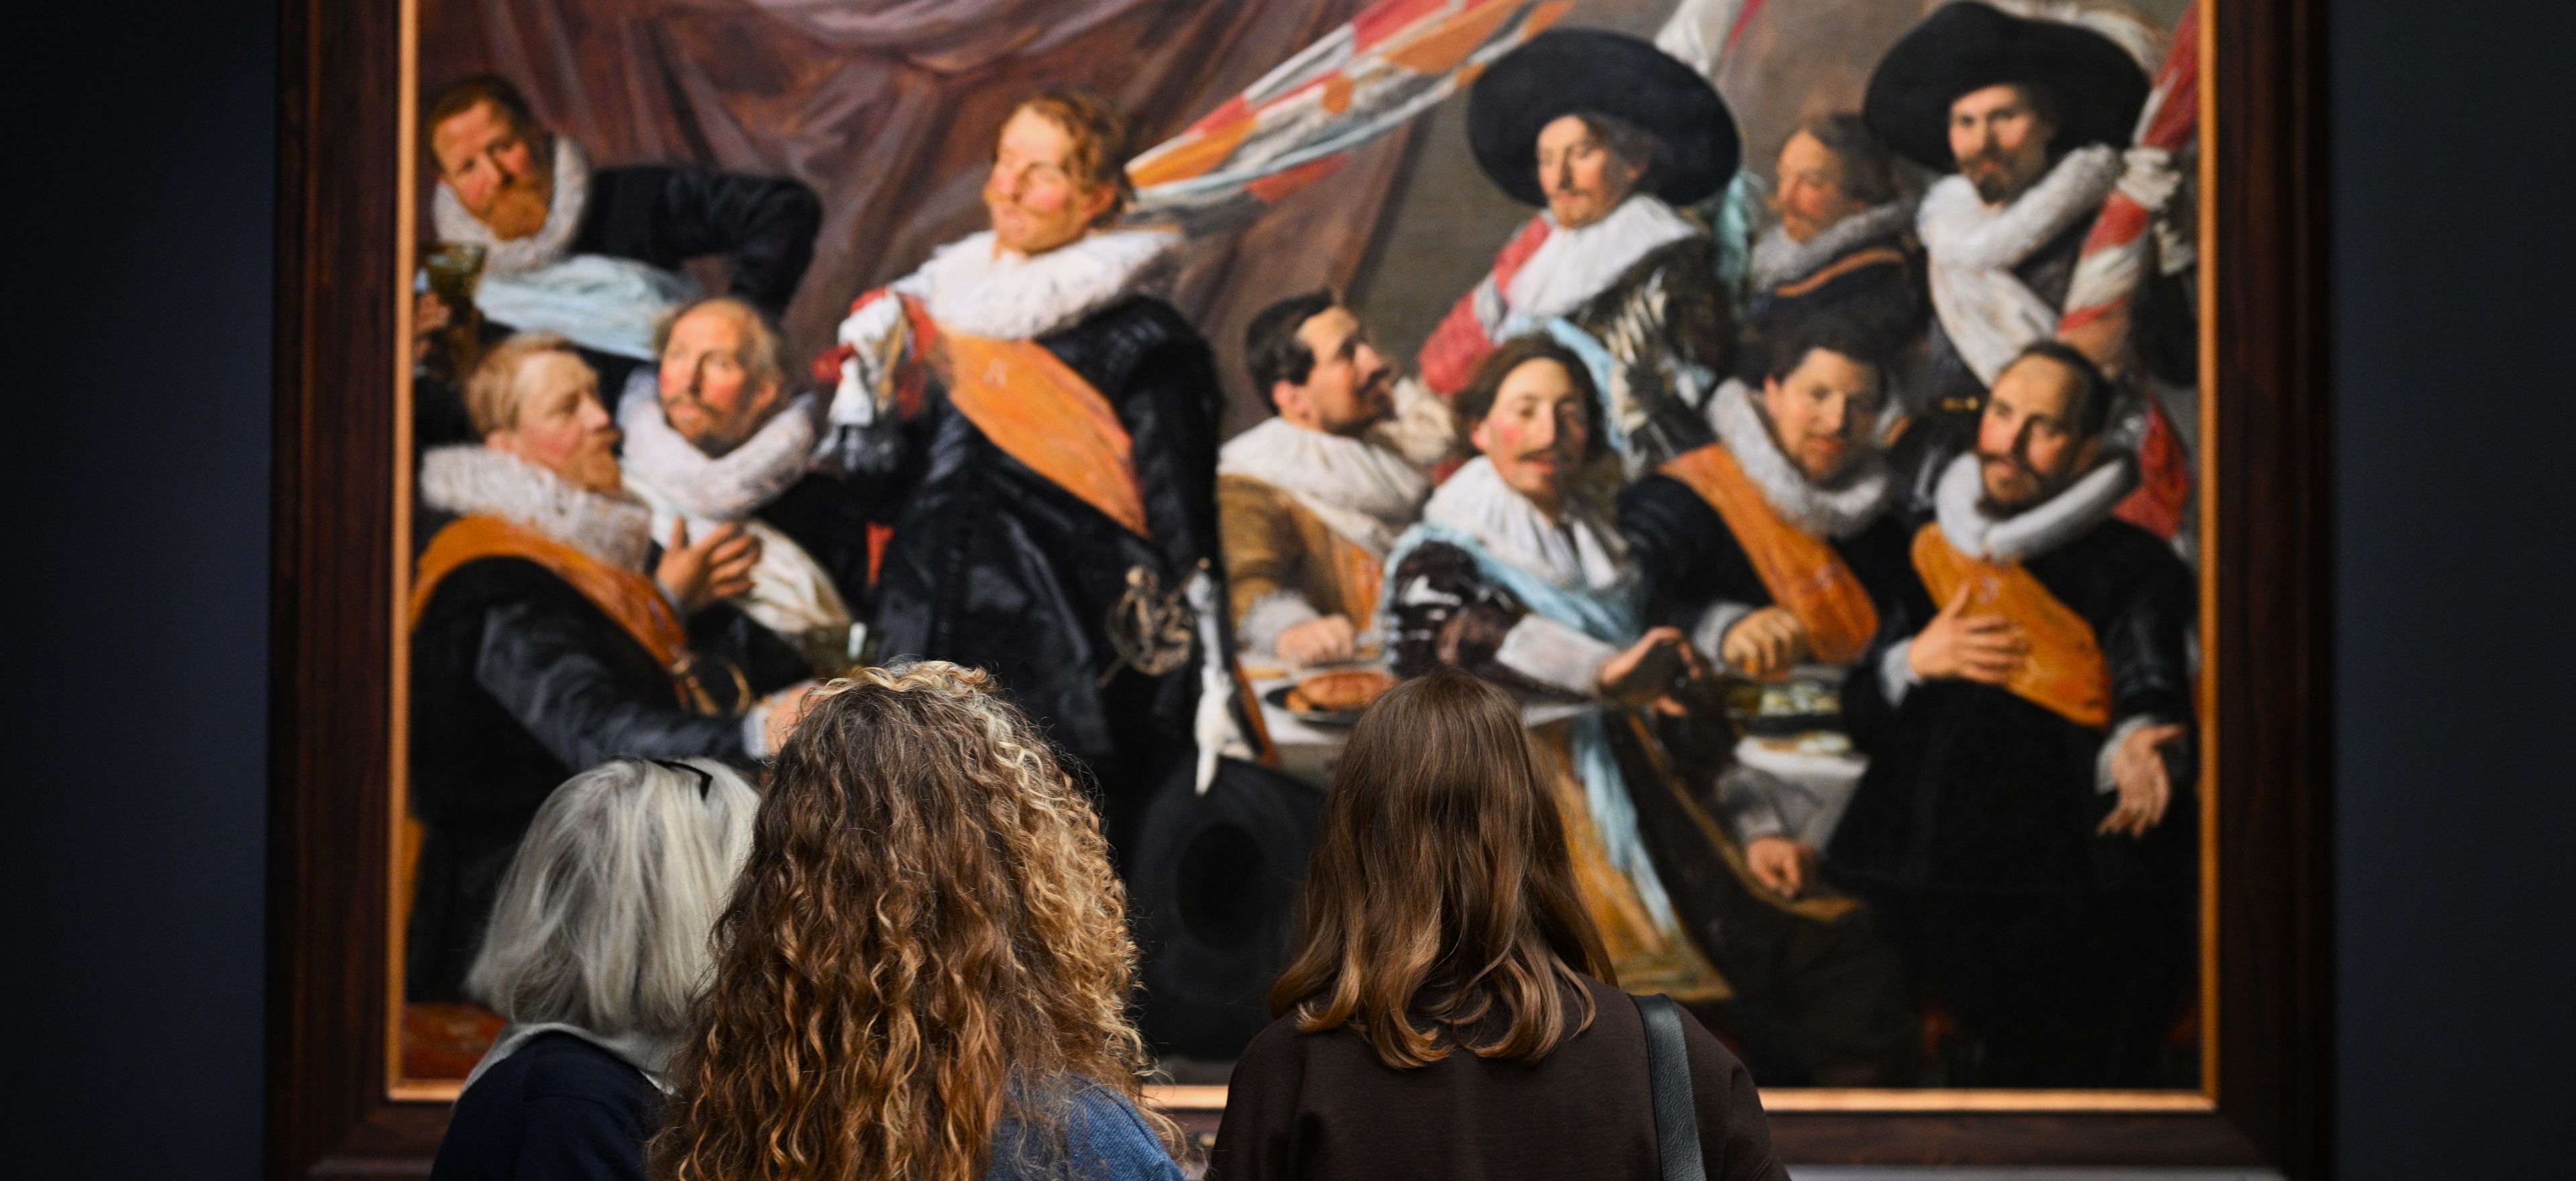 Three visitors looking at a group portrait of civic guards by Frans Hals at the Frans Hals Museum 